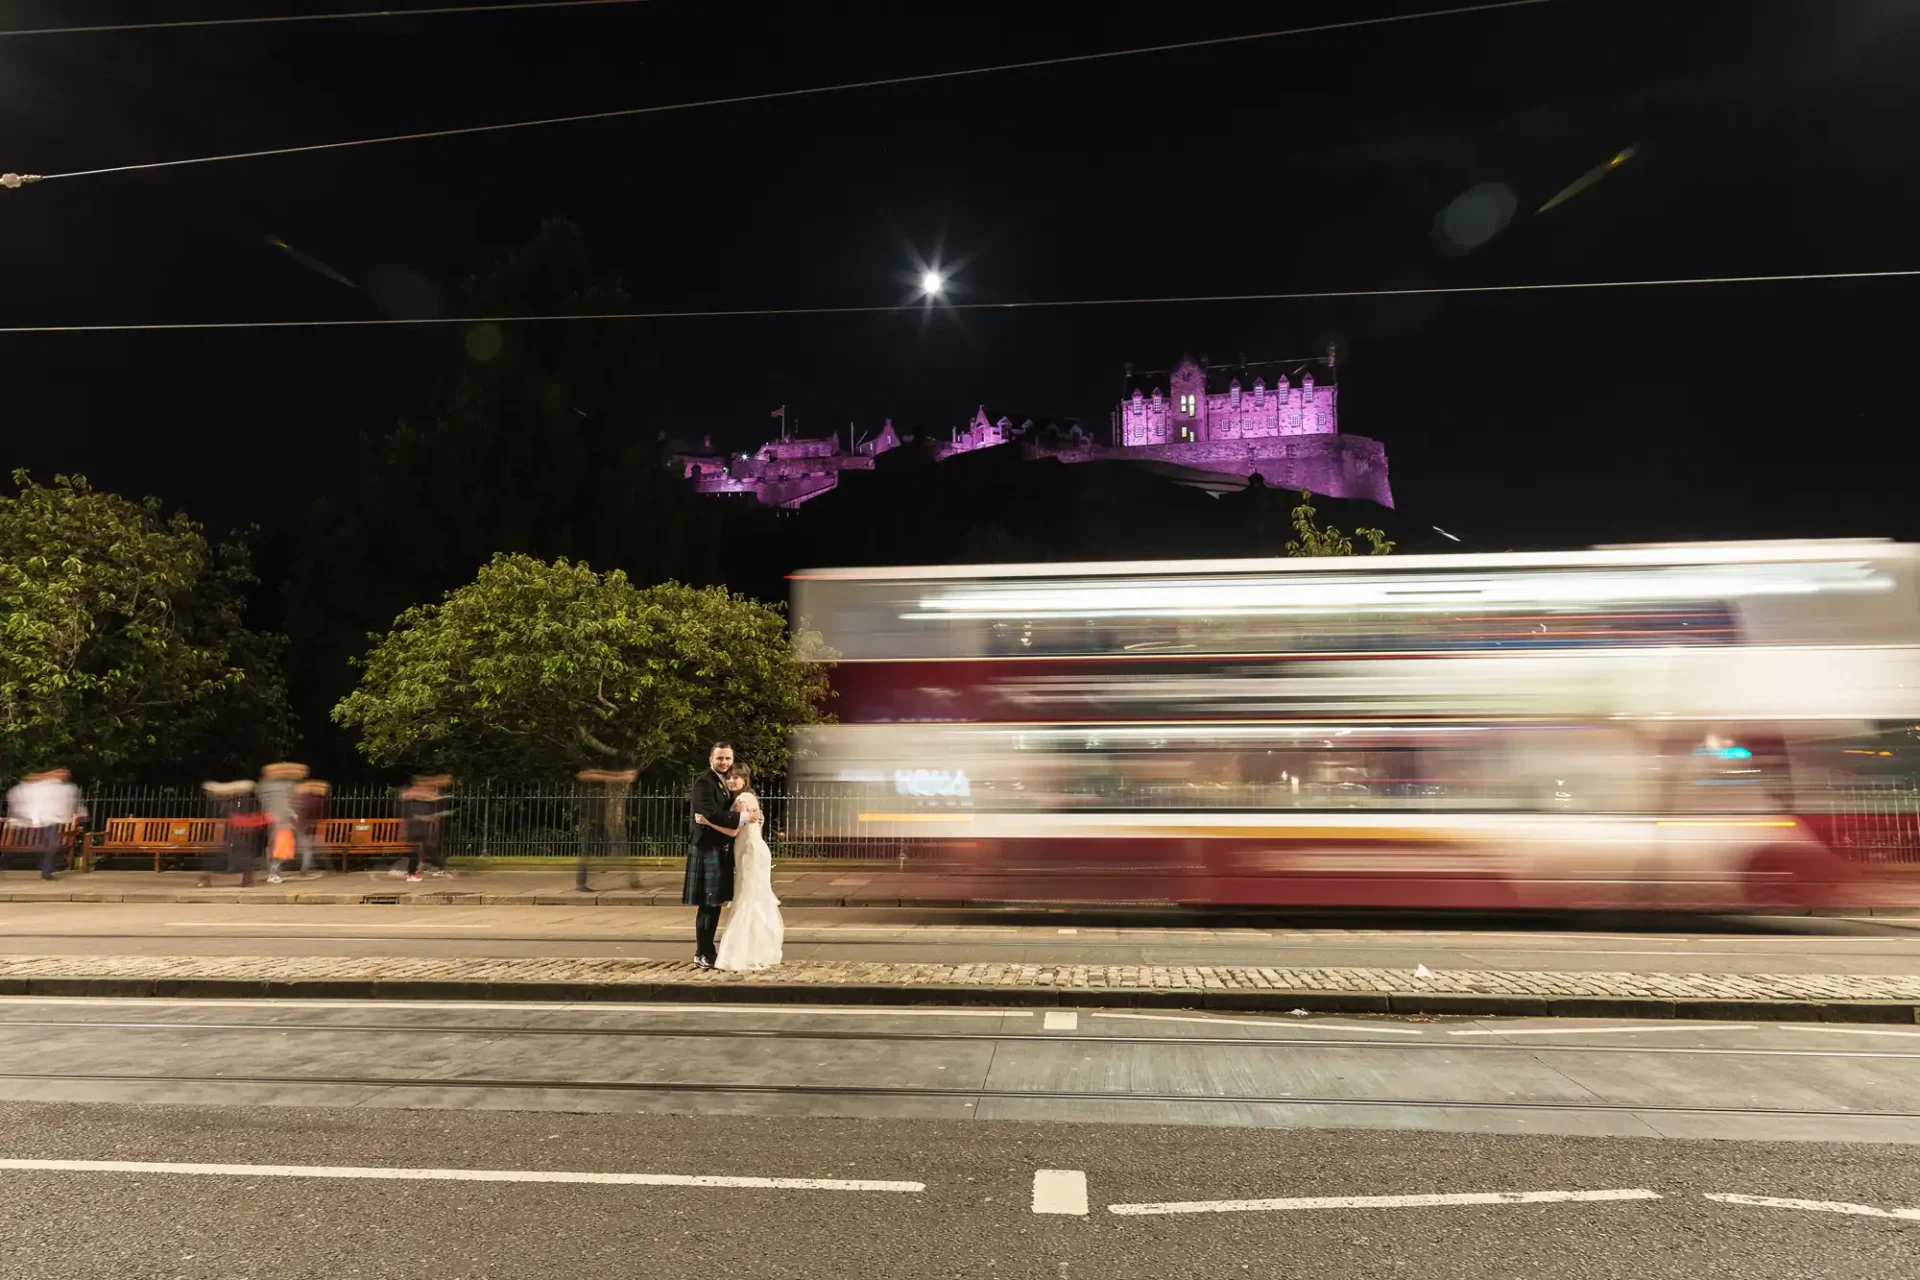 Night view of a couple holding hands on a street with a blurred bus passing by, and edinburgh castle illuminated in the background.